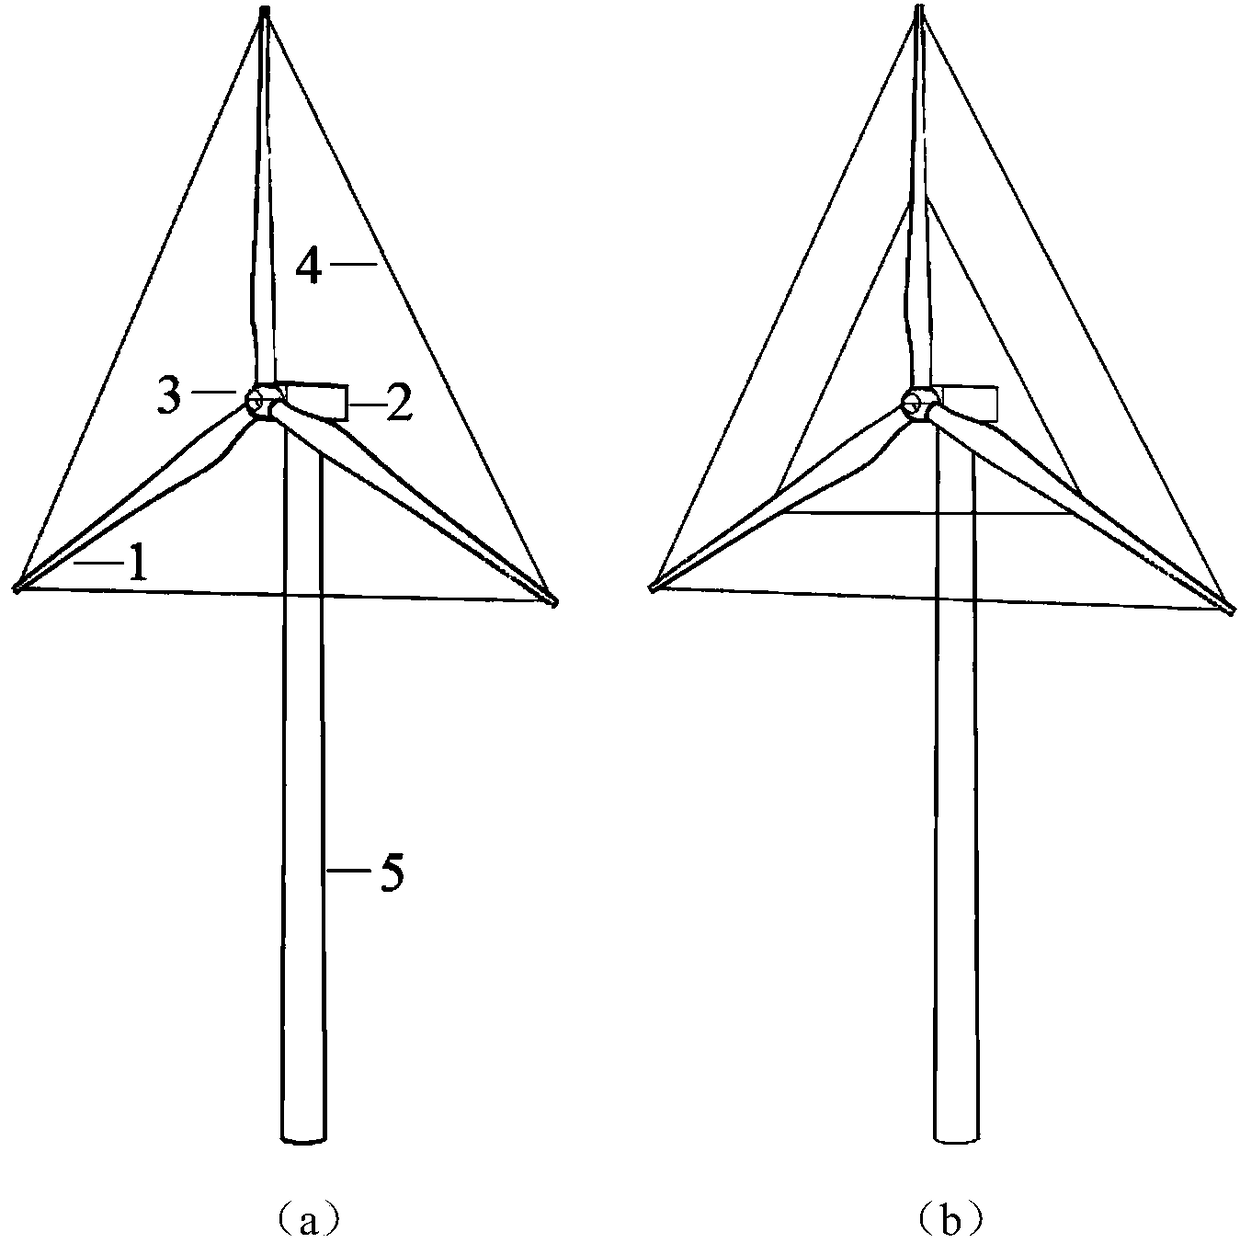 A spatial cable system and optimization method for controlling wind turbine blade flapping